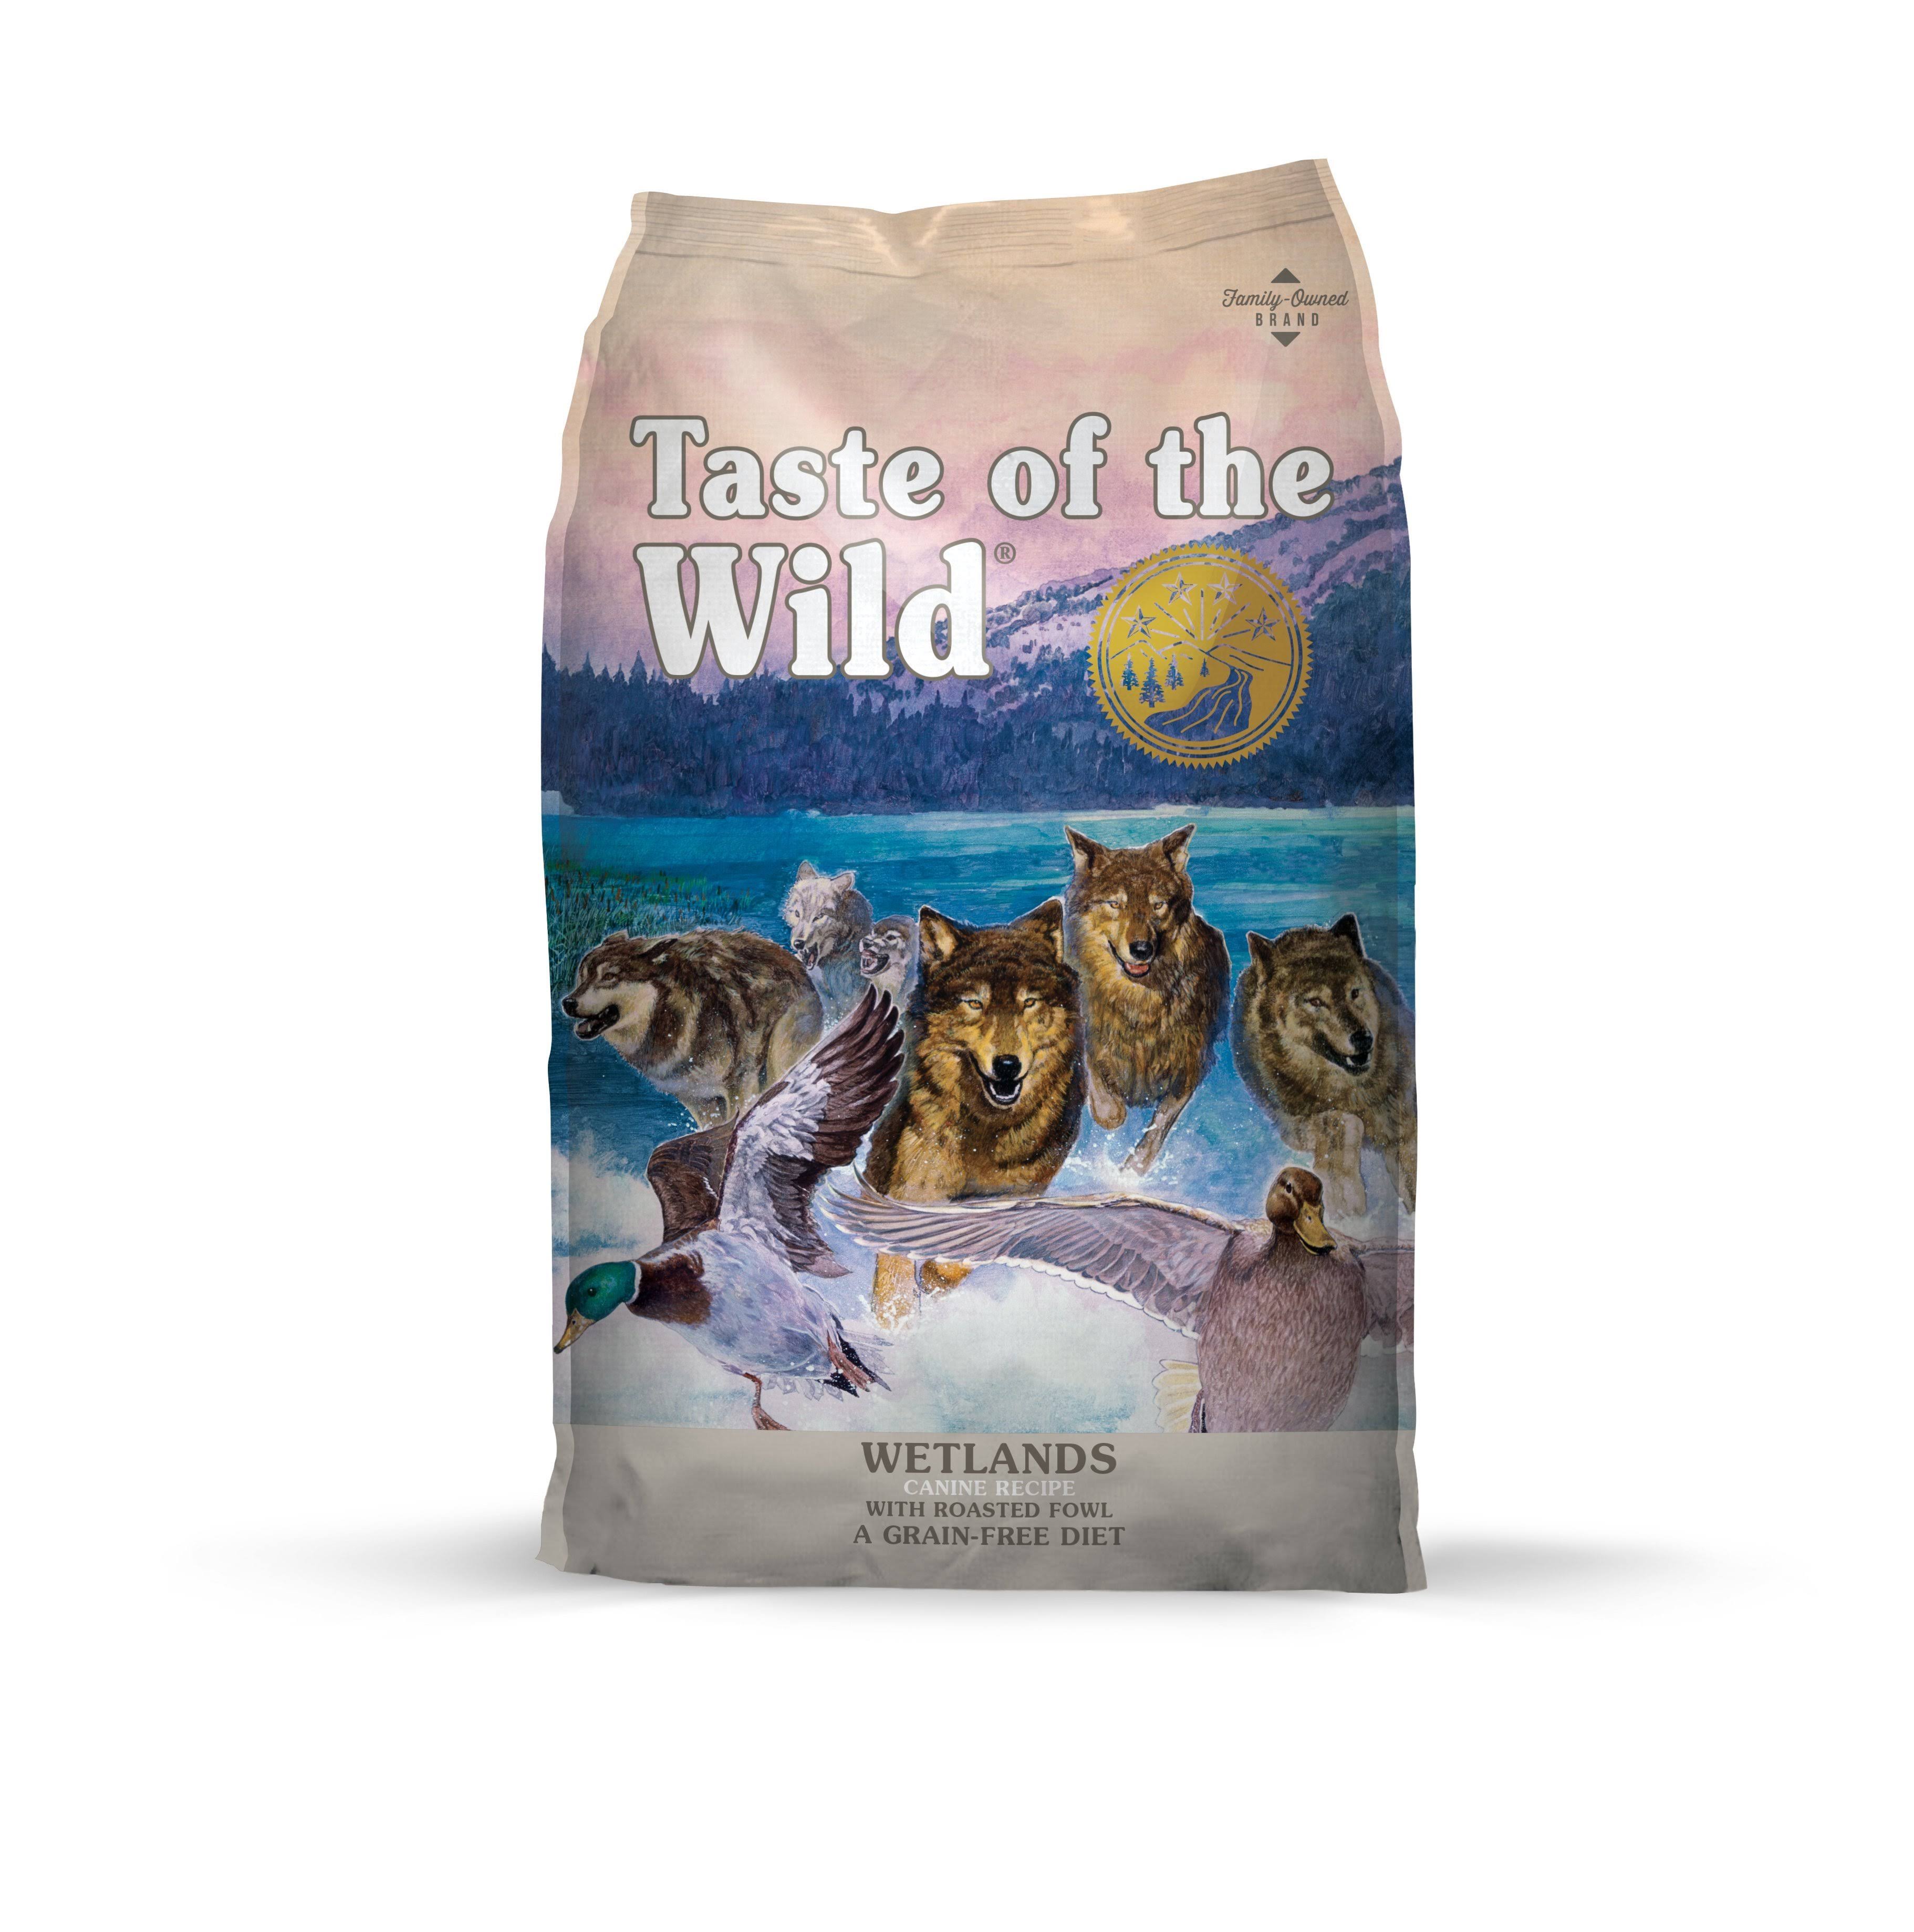 Taste of the Wild Wetlands with Roasted Fowl Dog Food [28lb]